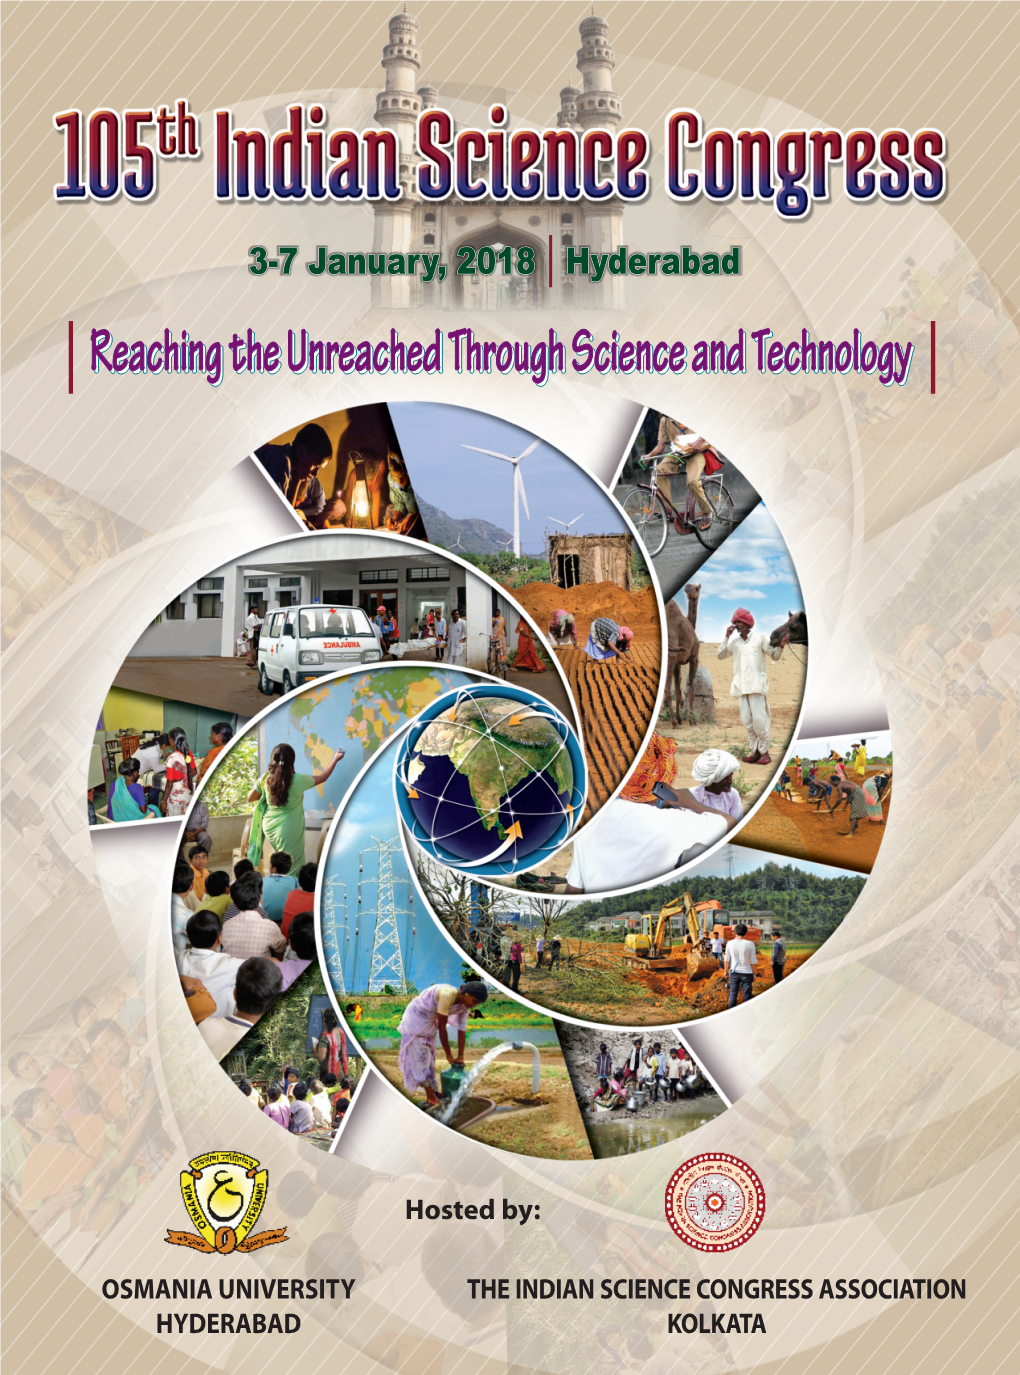 Reaching the Unreached Through Science and Technology